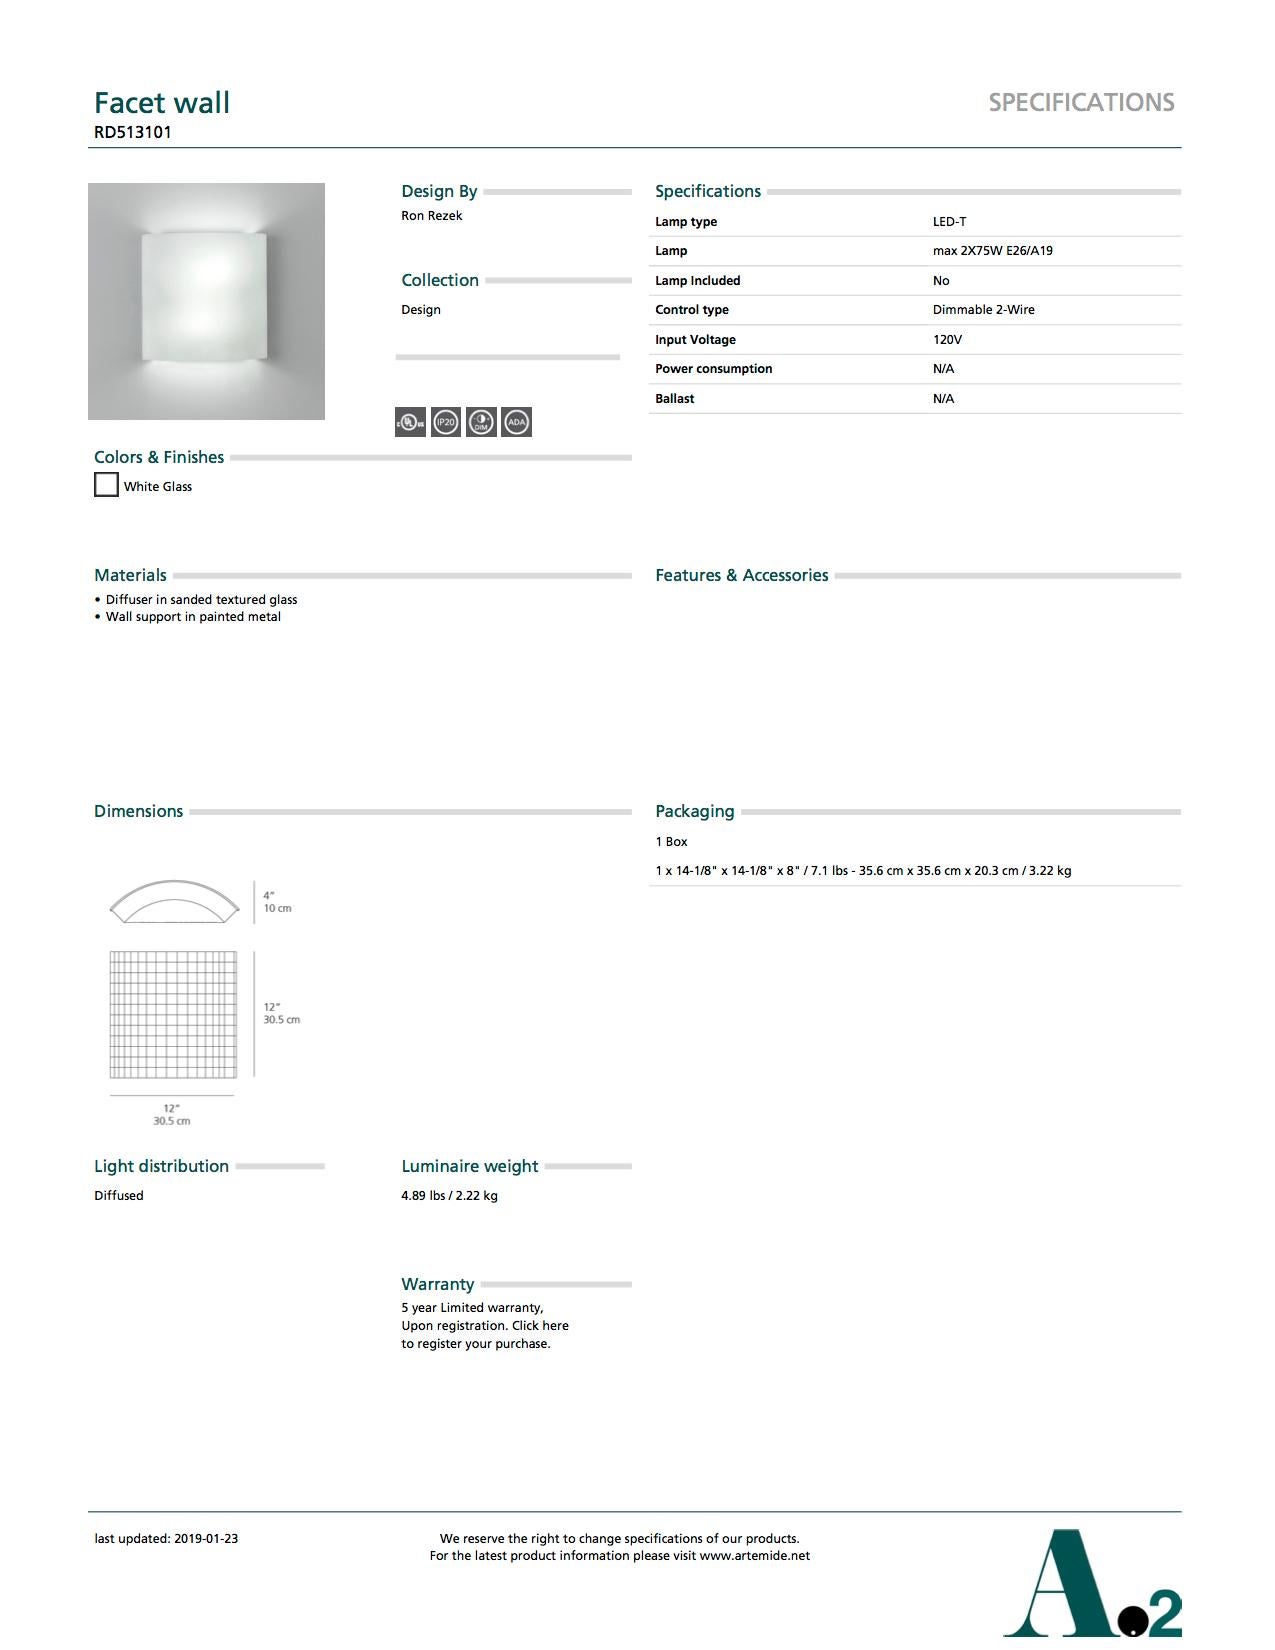 Canadian Artemide Facet Wall Light with White Glass For Sale